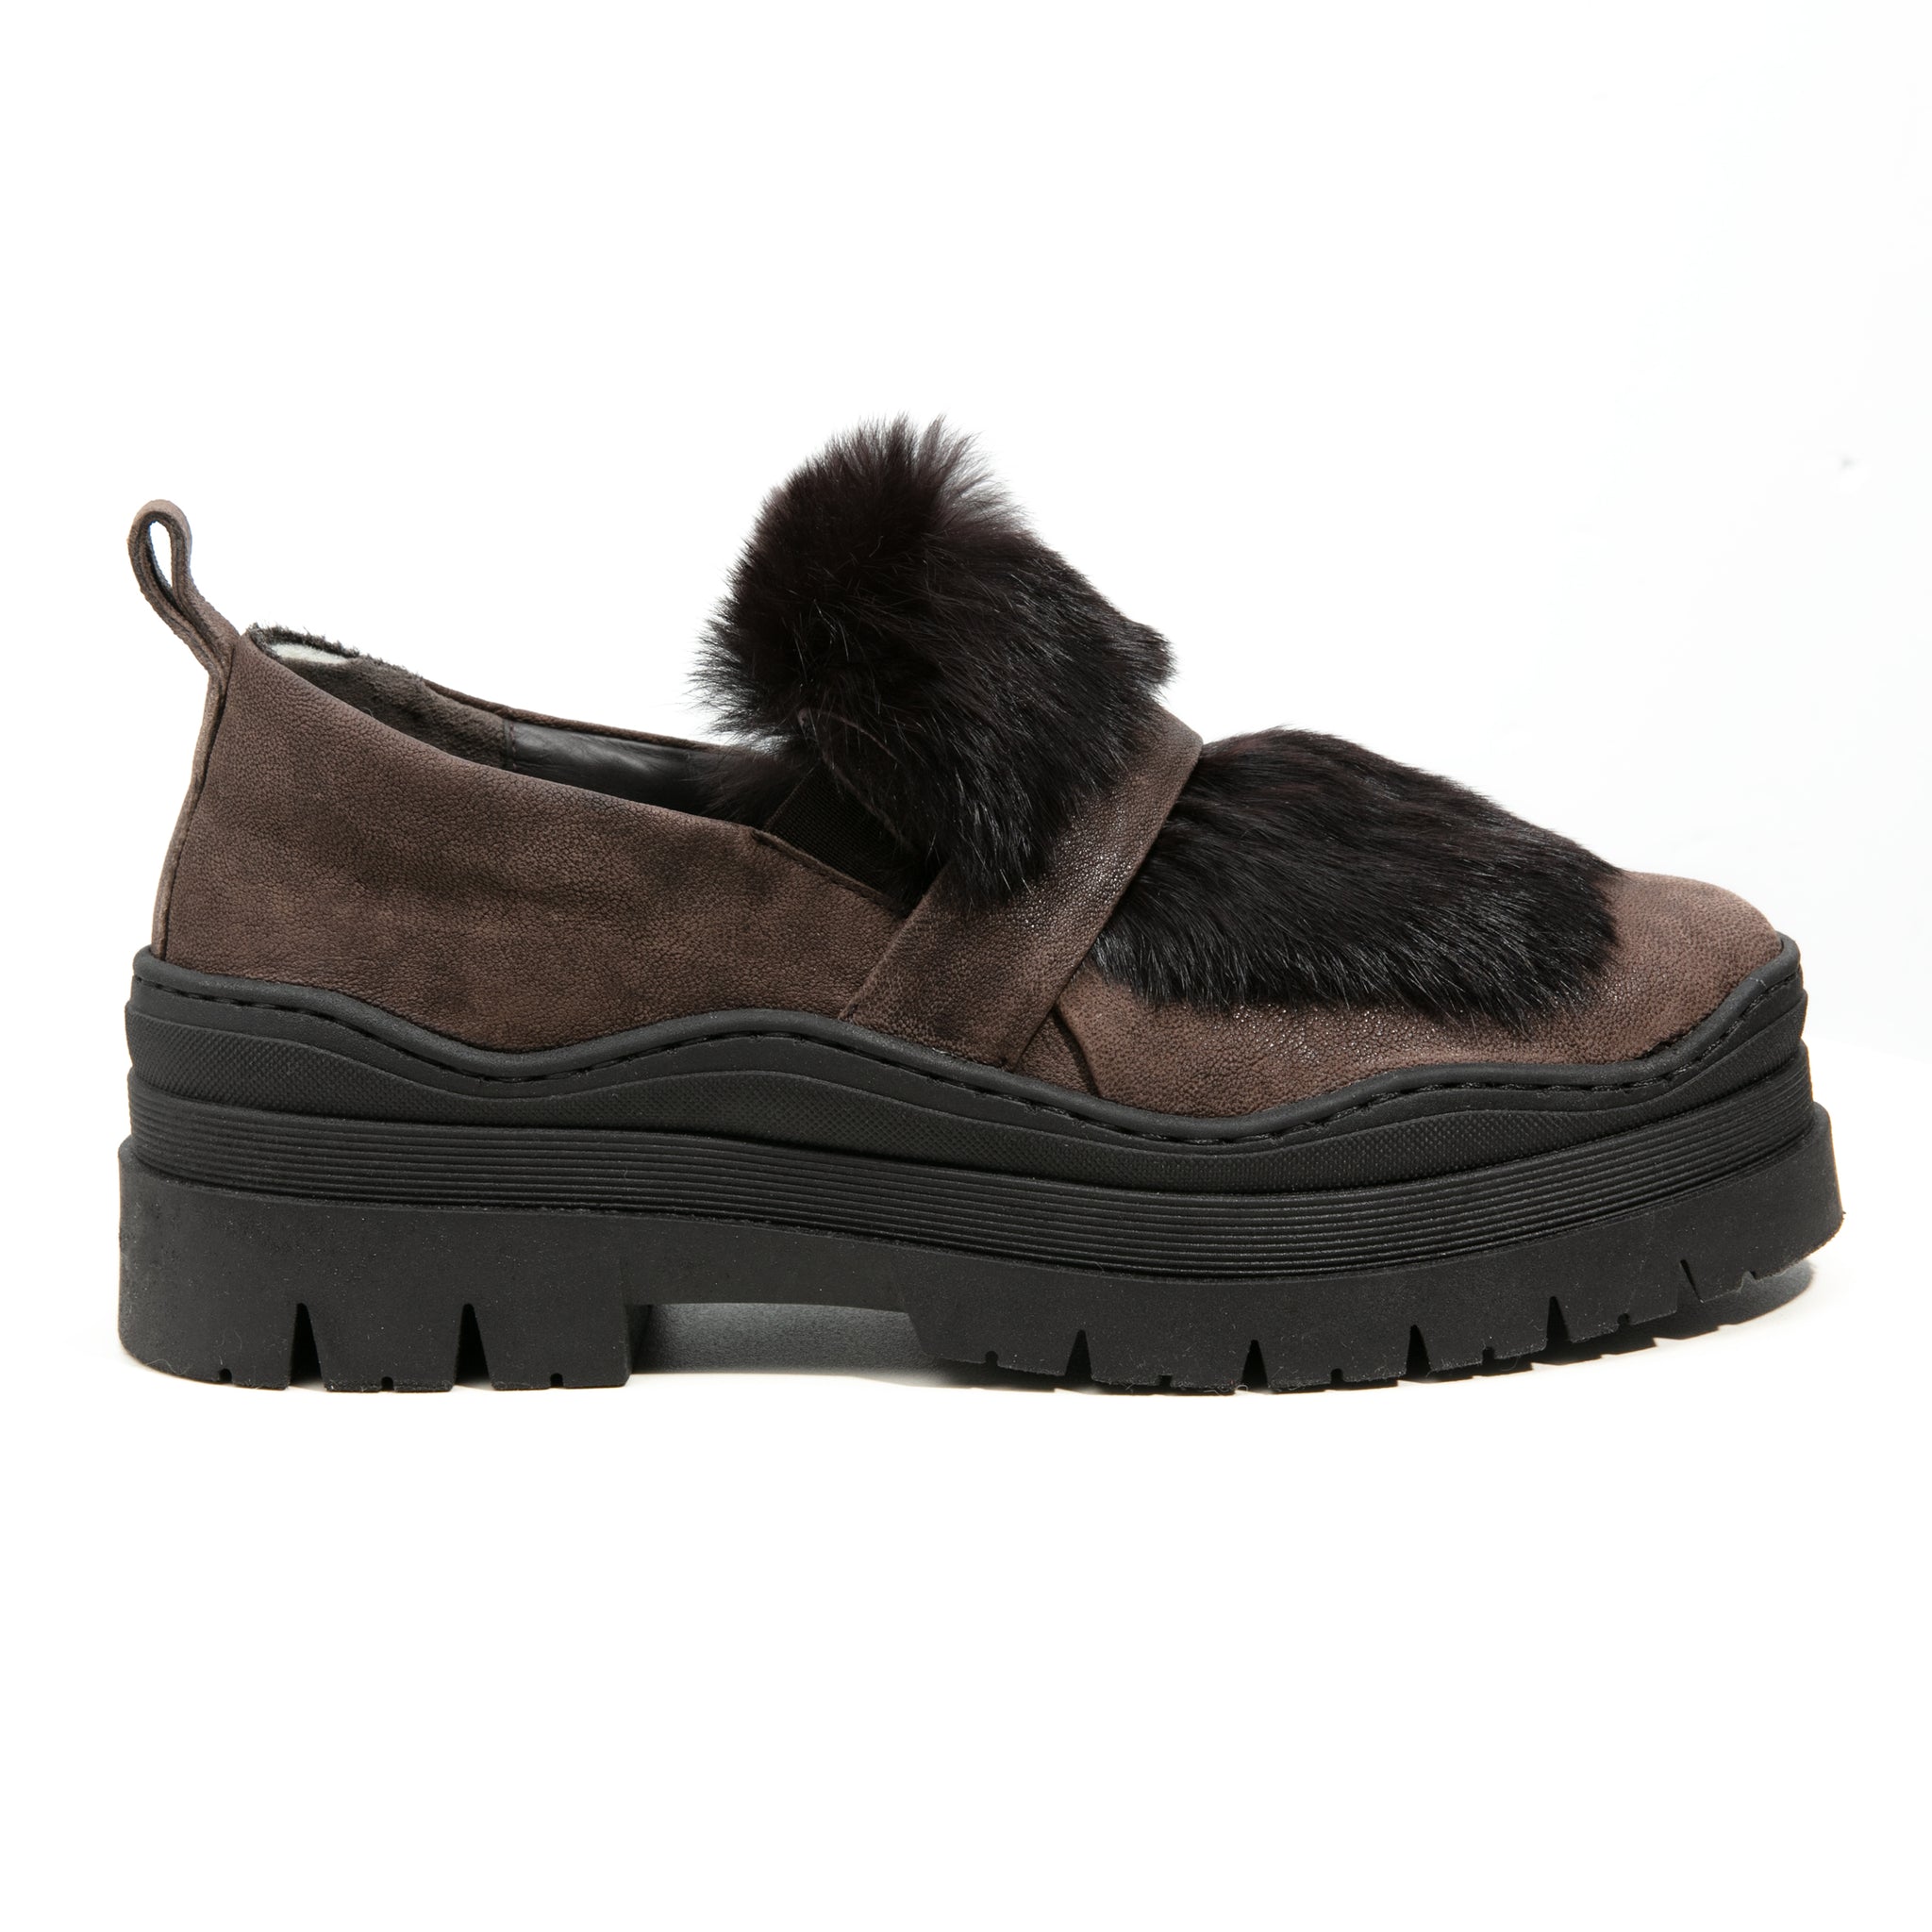 HENRY BEGUELIN Grattato Leather Loafer with Fur in Moro